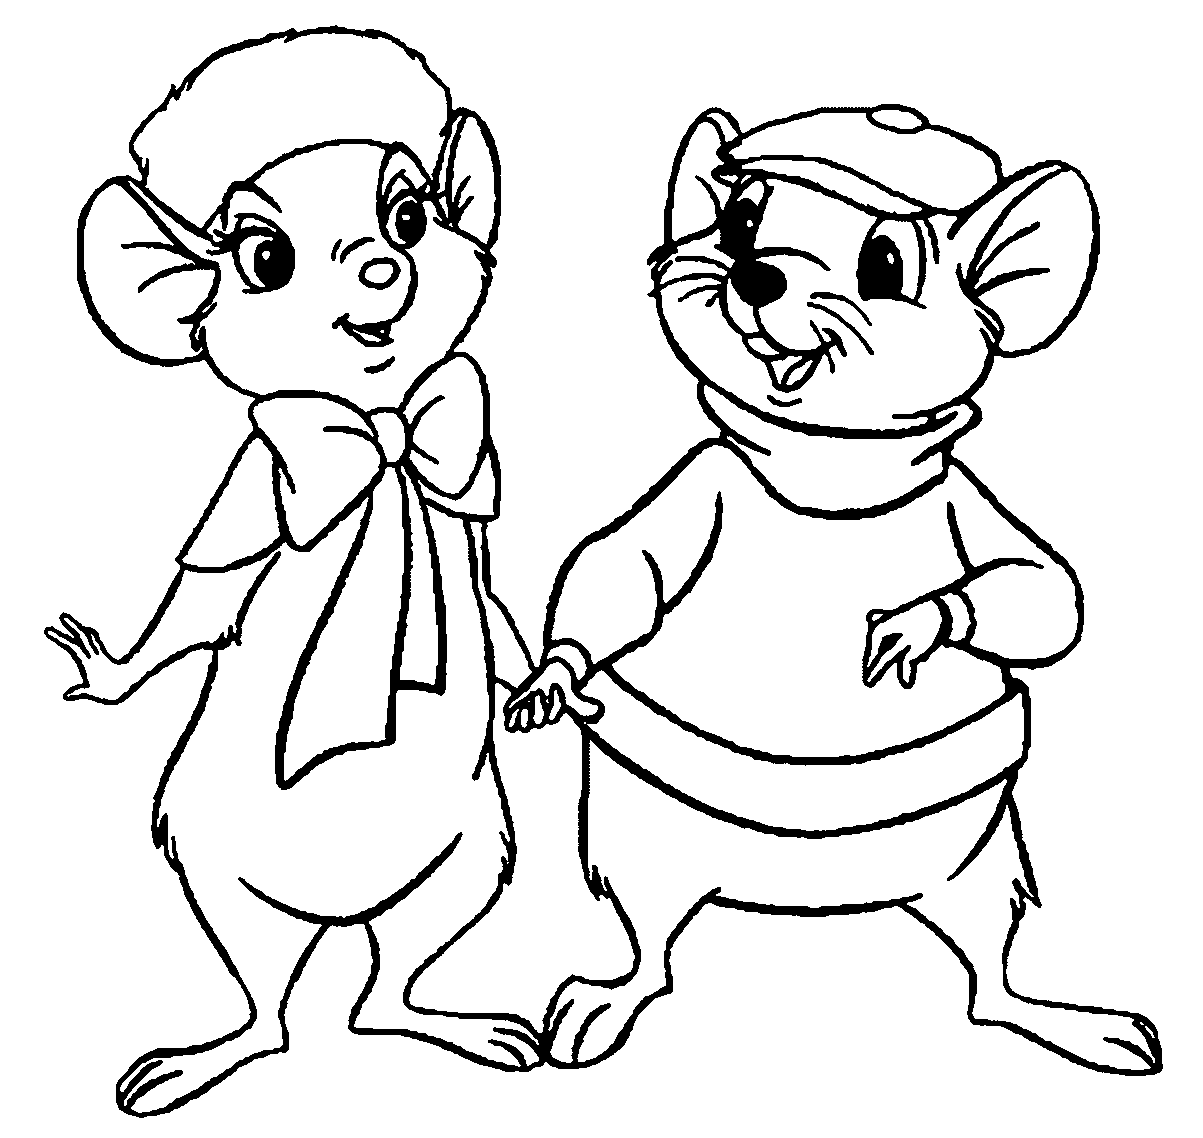 Bernard and Bianca holding hands Coloring Page